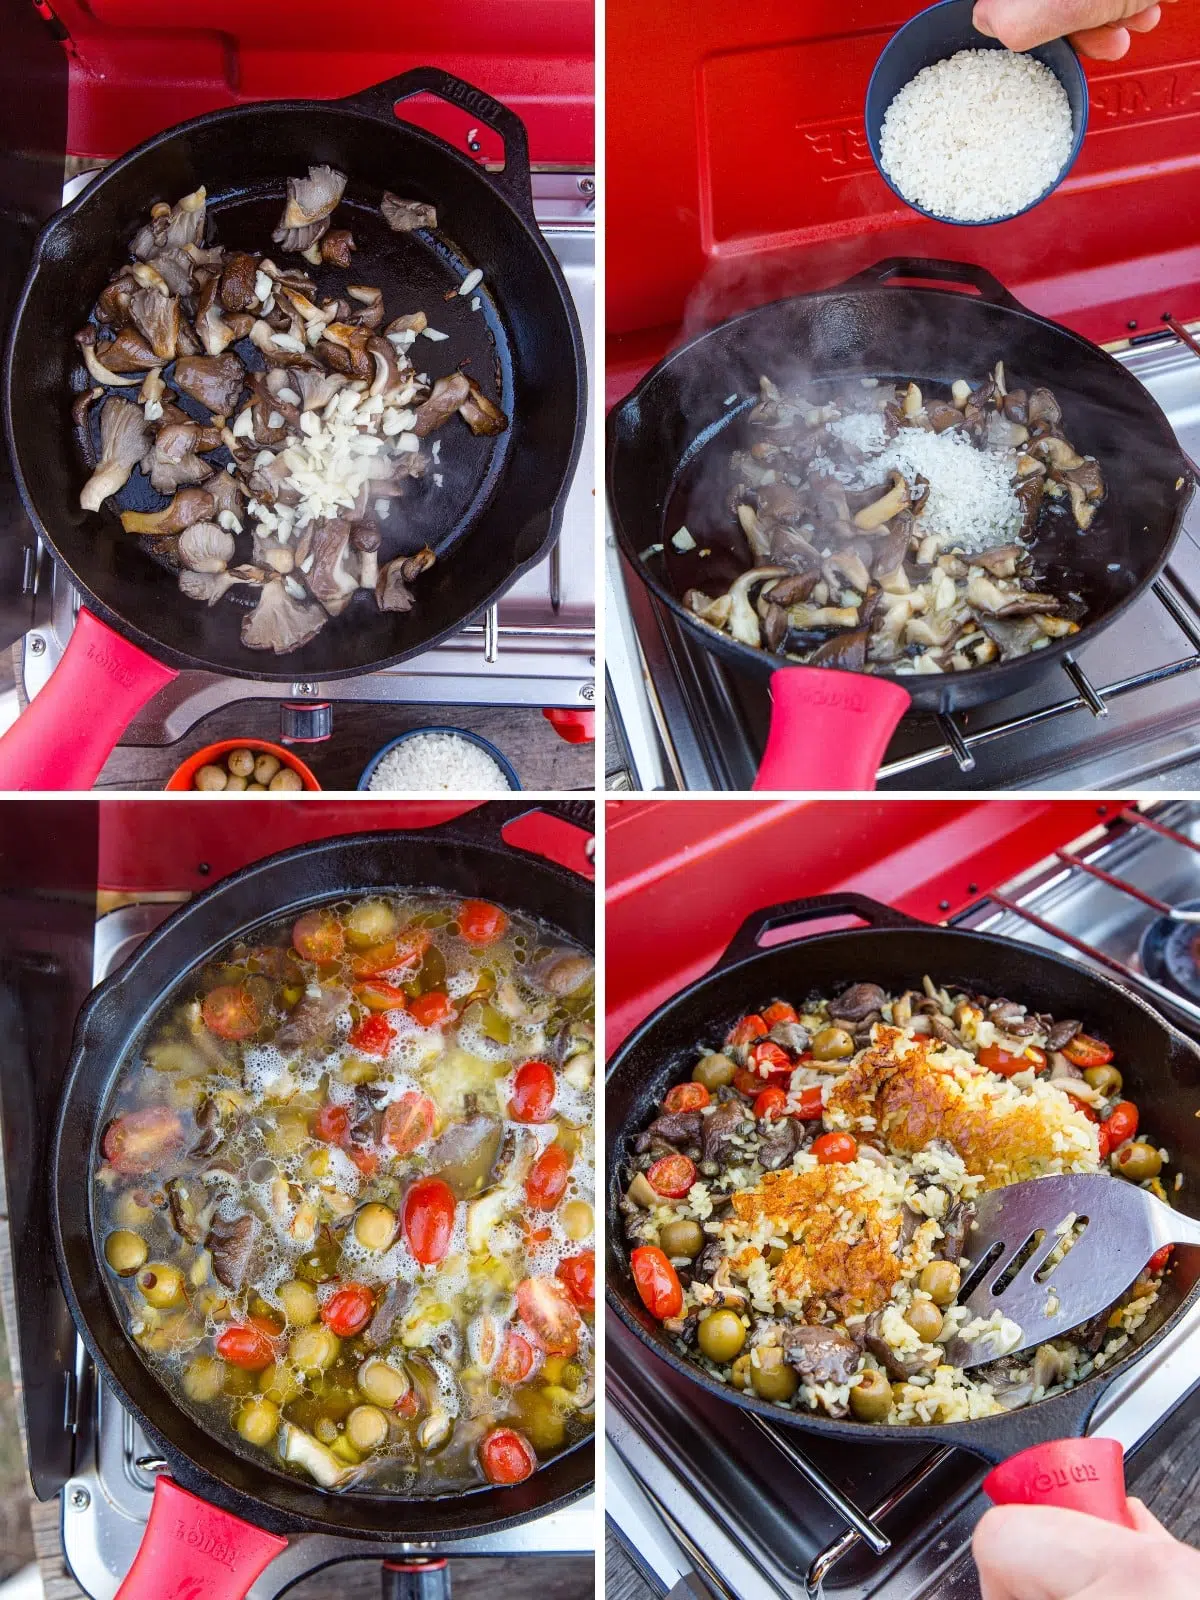 Step by step images of making vegan paella